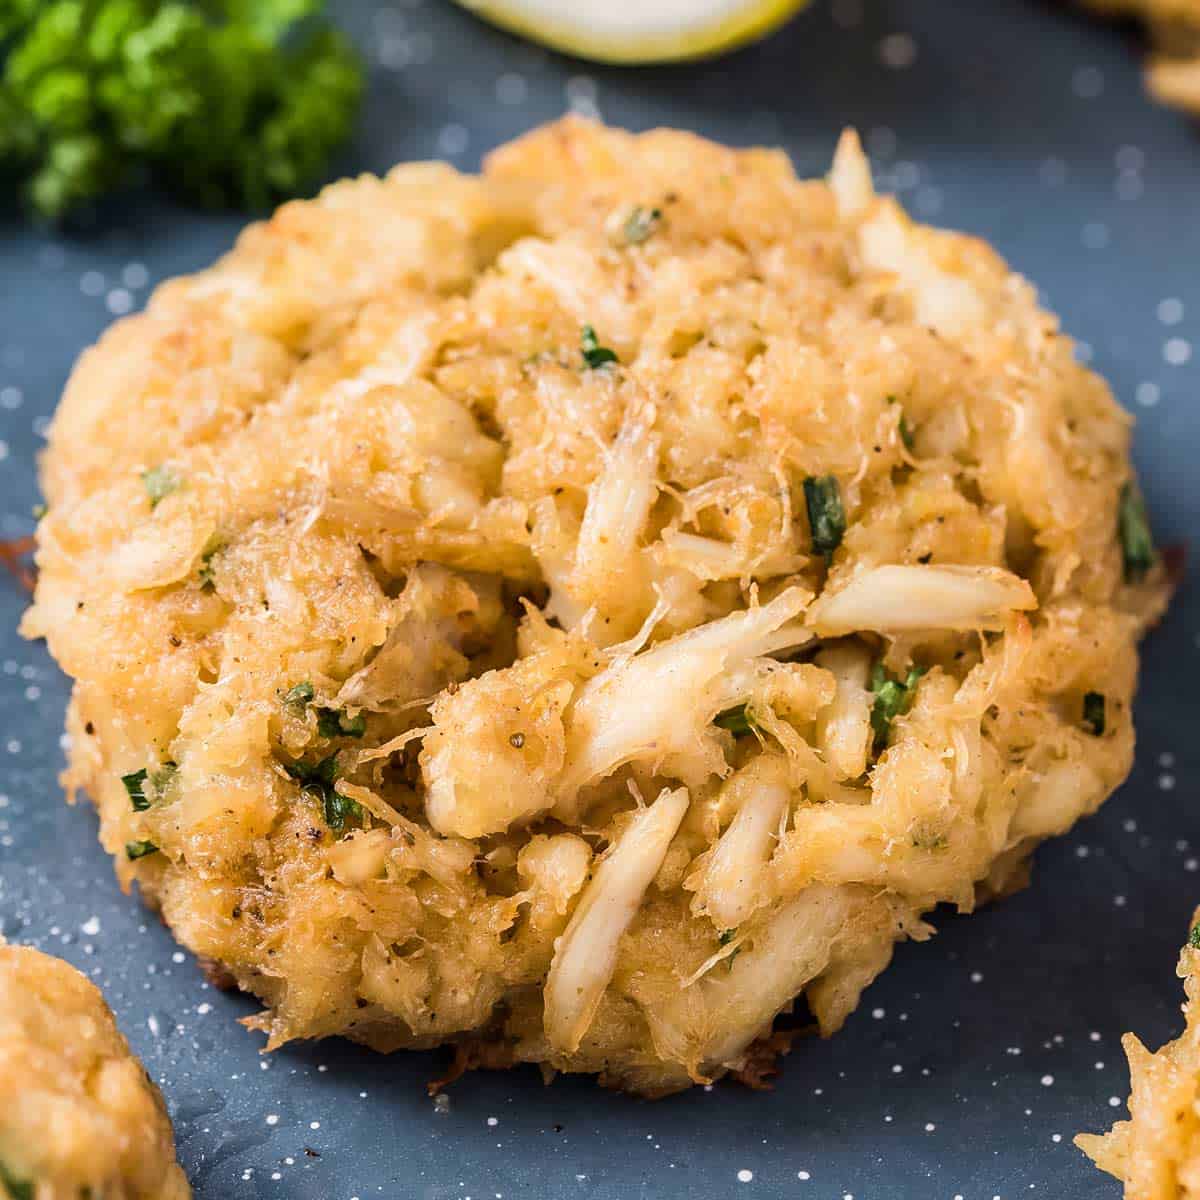 https://www.thechunkychef.com/wp-content/uploads/2021/05/Maryland-Style-Crab-Cakes-recipe-card.jpg